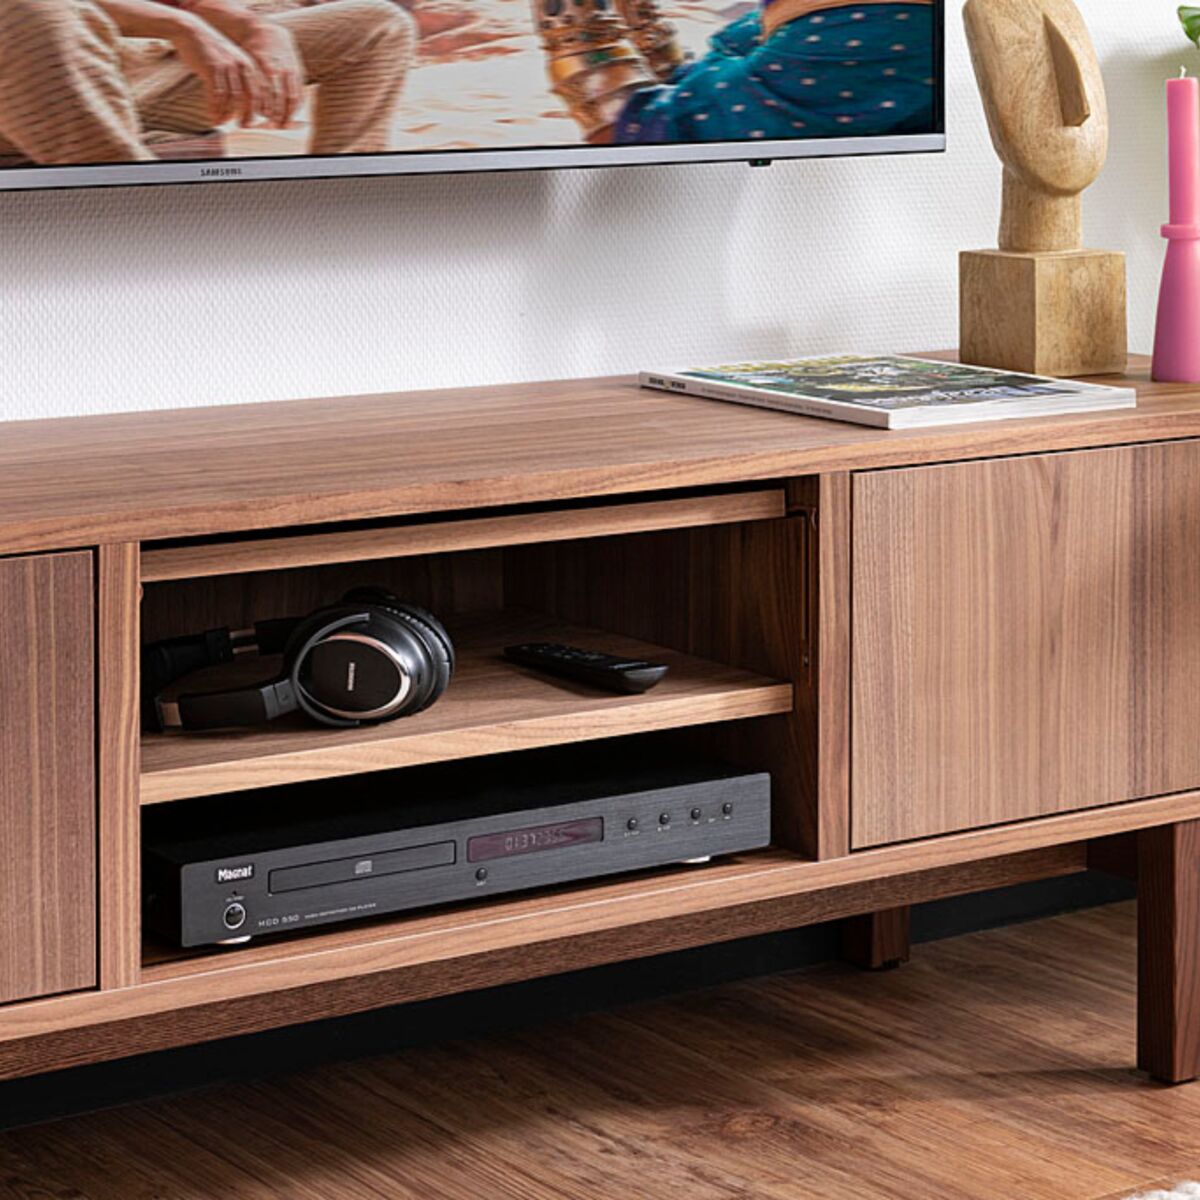 Connect AD12 - Audio converter - Analog to digital - Ambiance Image  of CD player in cabinet | Marmitek